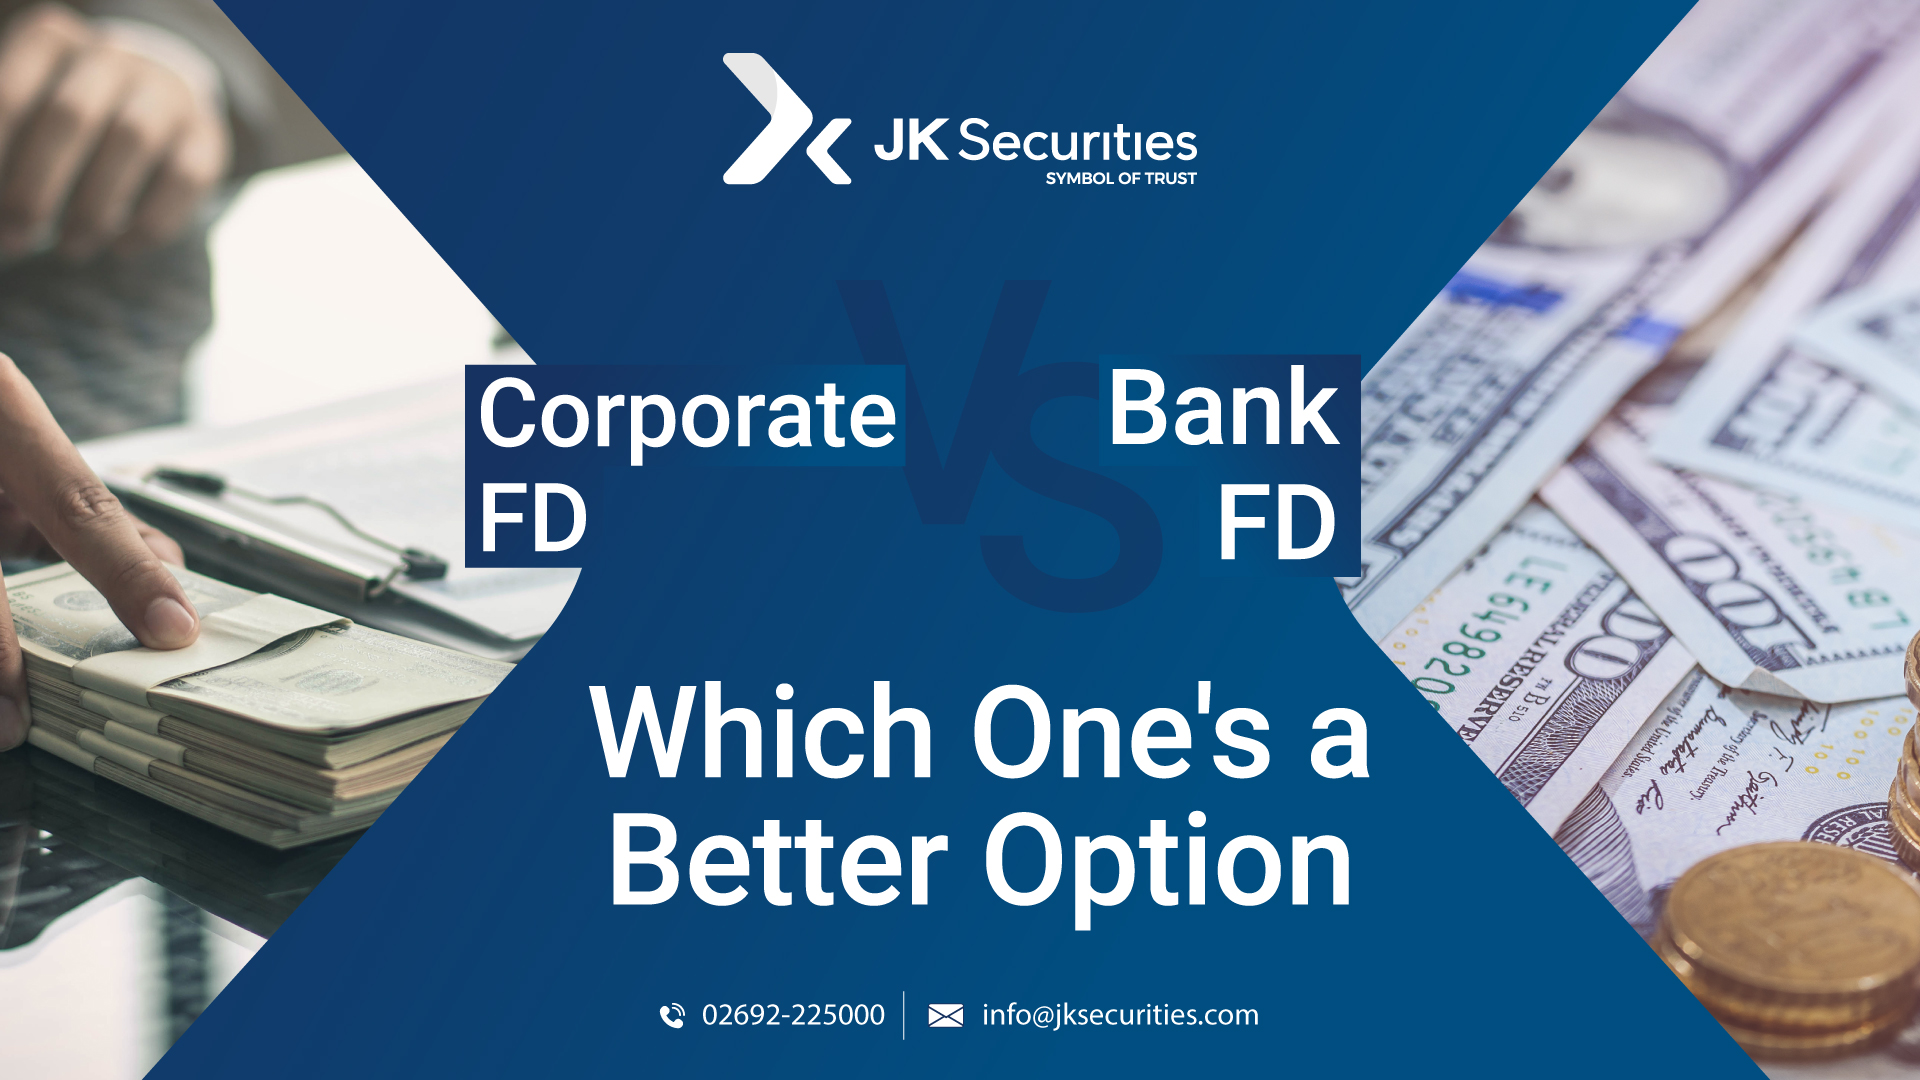 Bank FD Vs Corporate FD: Which One's a Better Option